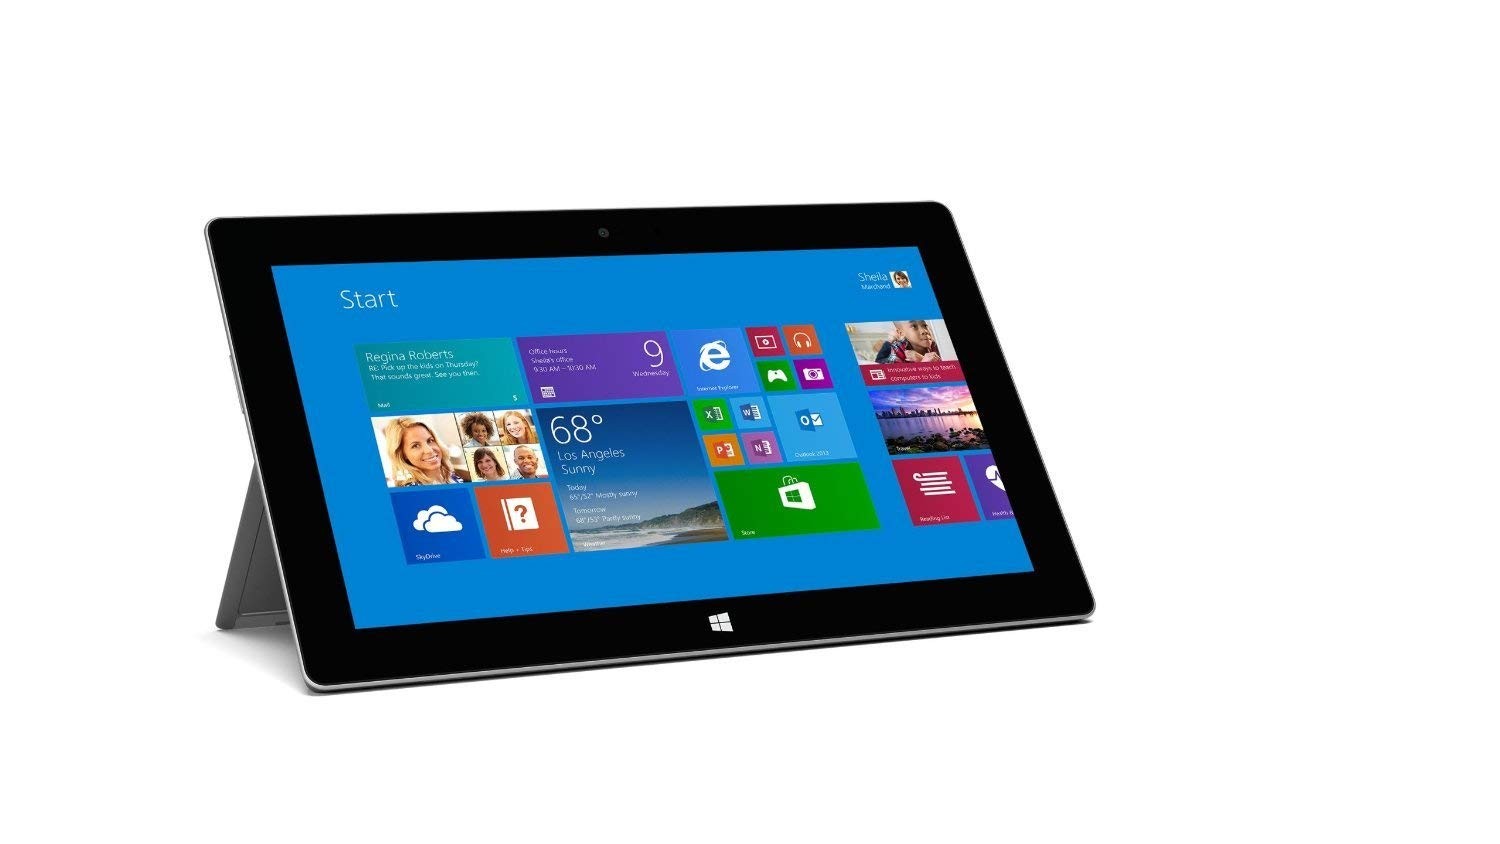 MSFT-SURF-PRO2-TAB-I5-256-Microsoft Surface Pro 2 Refurbished Tablet 256 GB SSD 8 GB RAM 10.6-inch Core i5 Pre-installed Windows 10 Professional-image